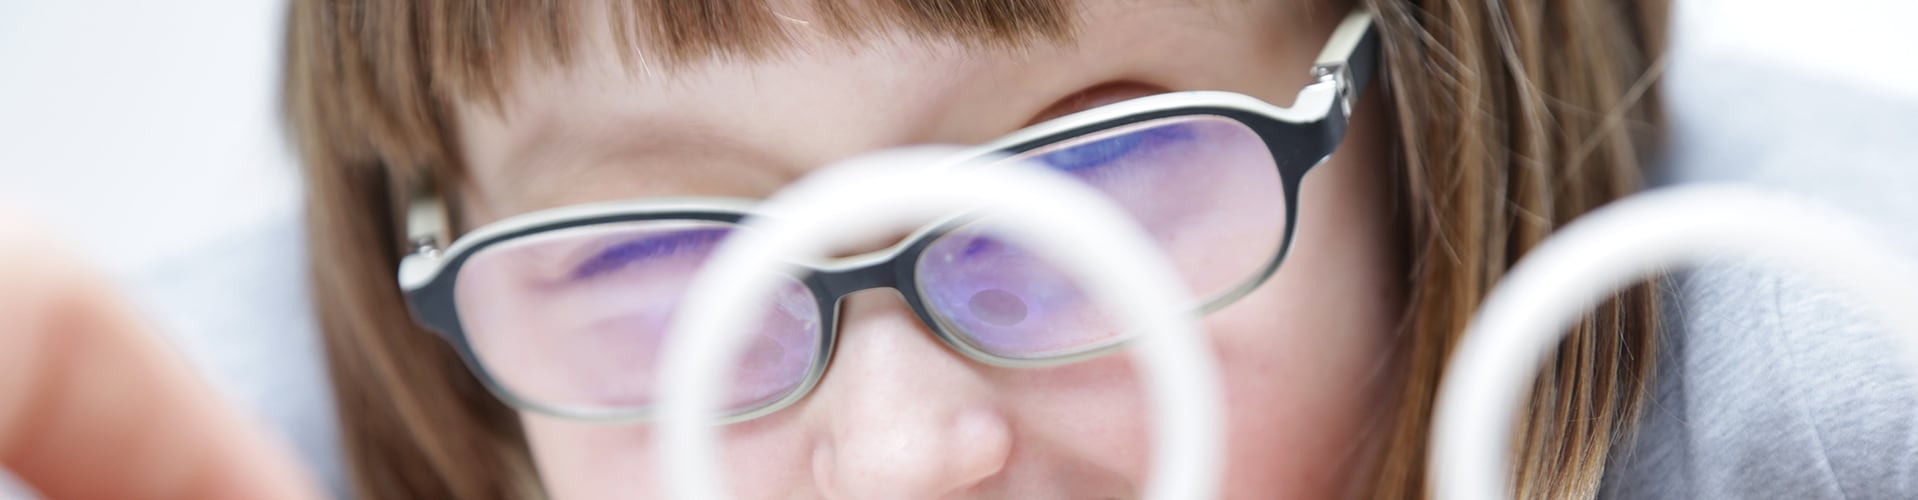 a child with glasses